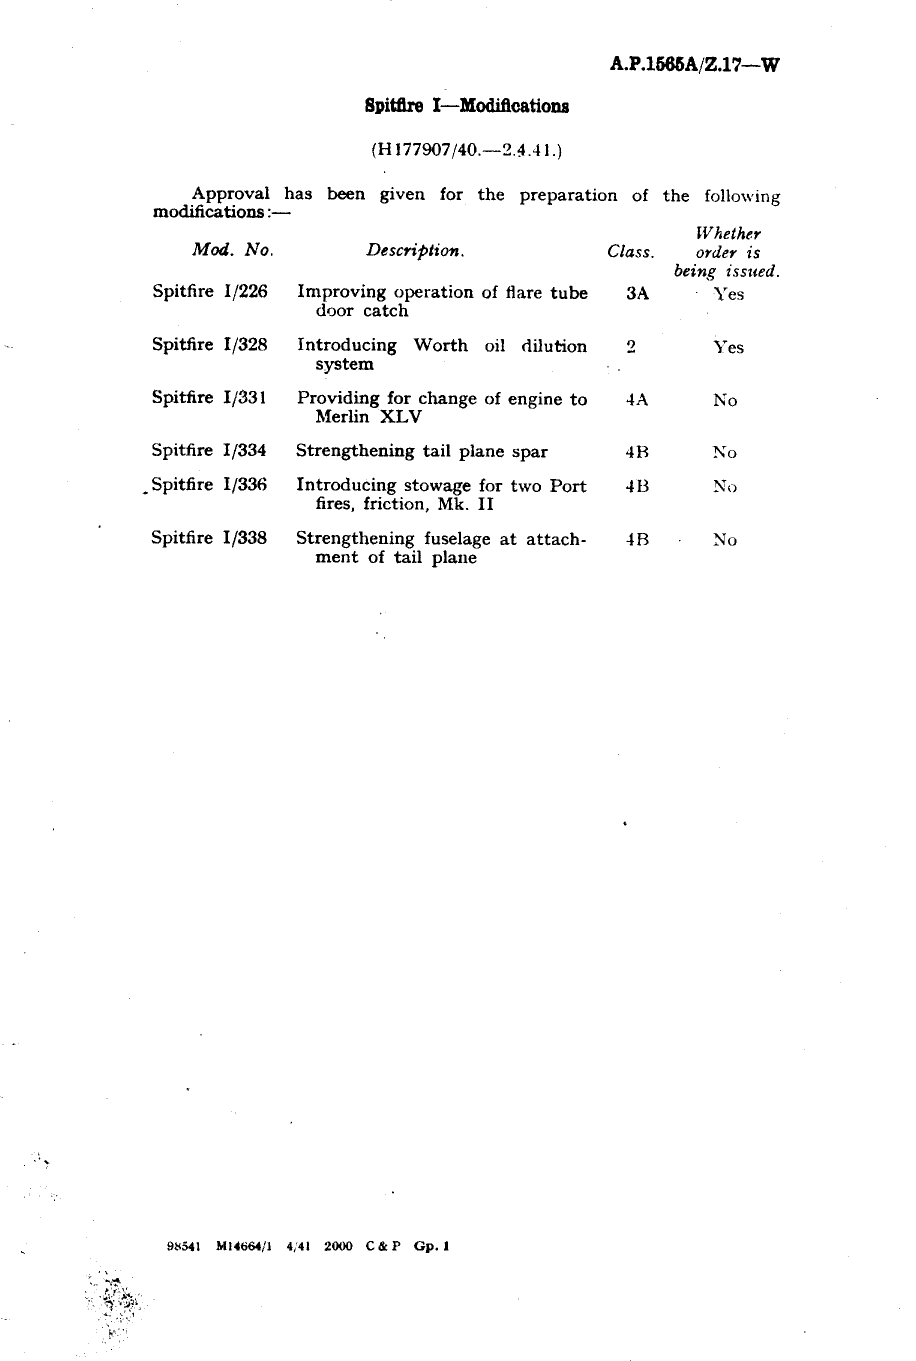 Sample page 1 from AirCorps Library document: Spitfire I Modifications 226, 328, 331, 334, 336 and 338